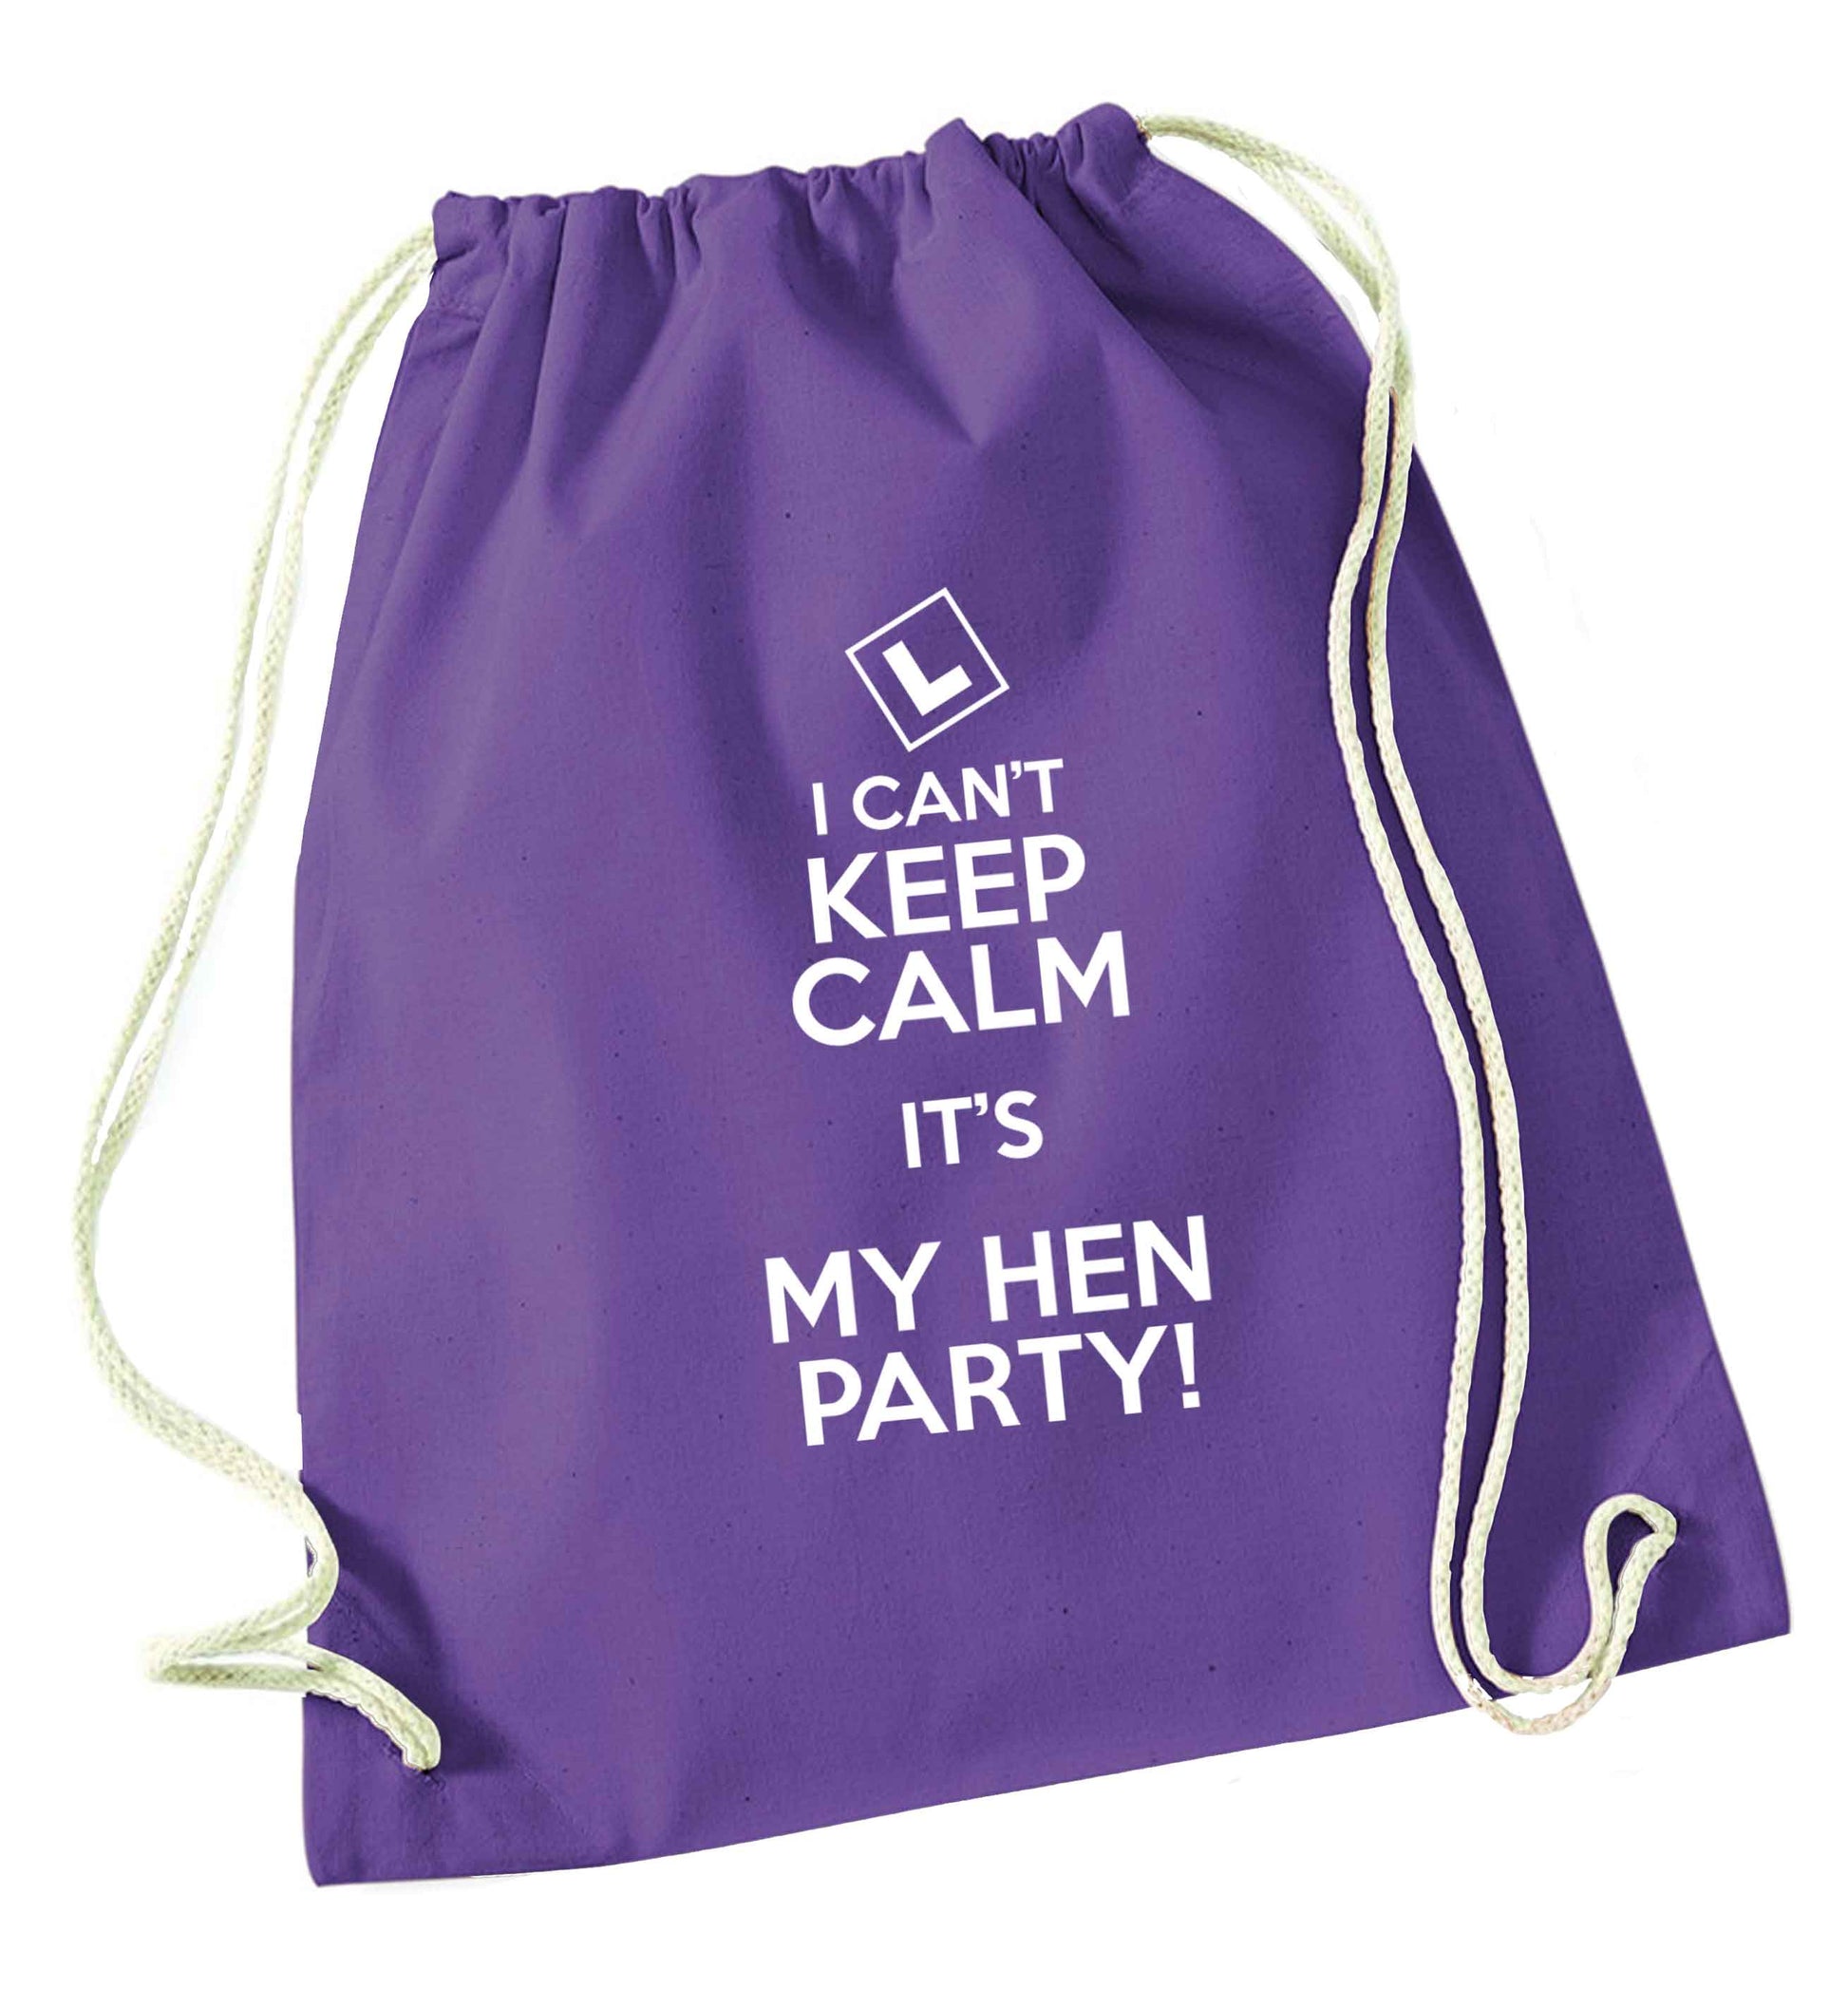 I can't keep calm it's my hen party purple drawstring bag